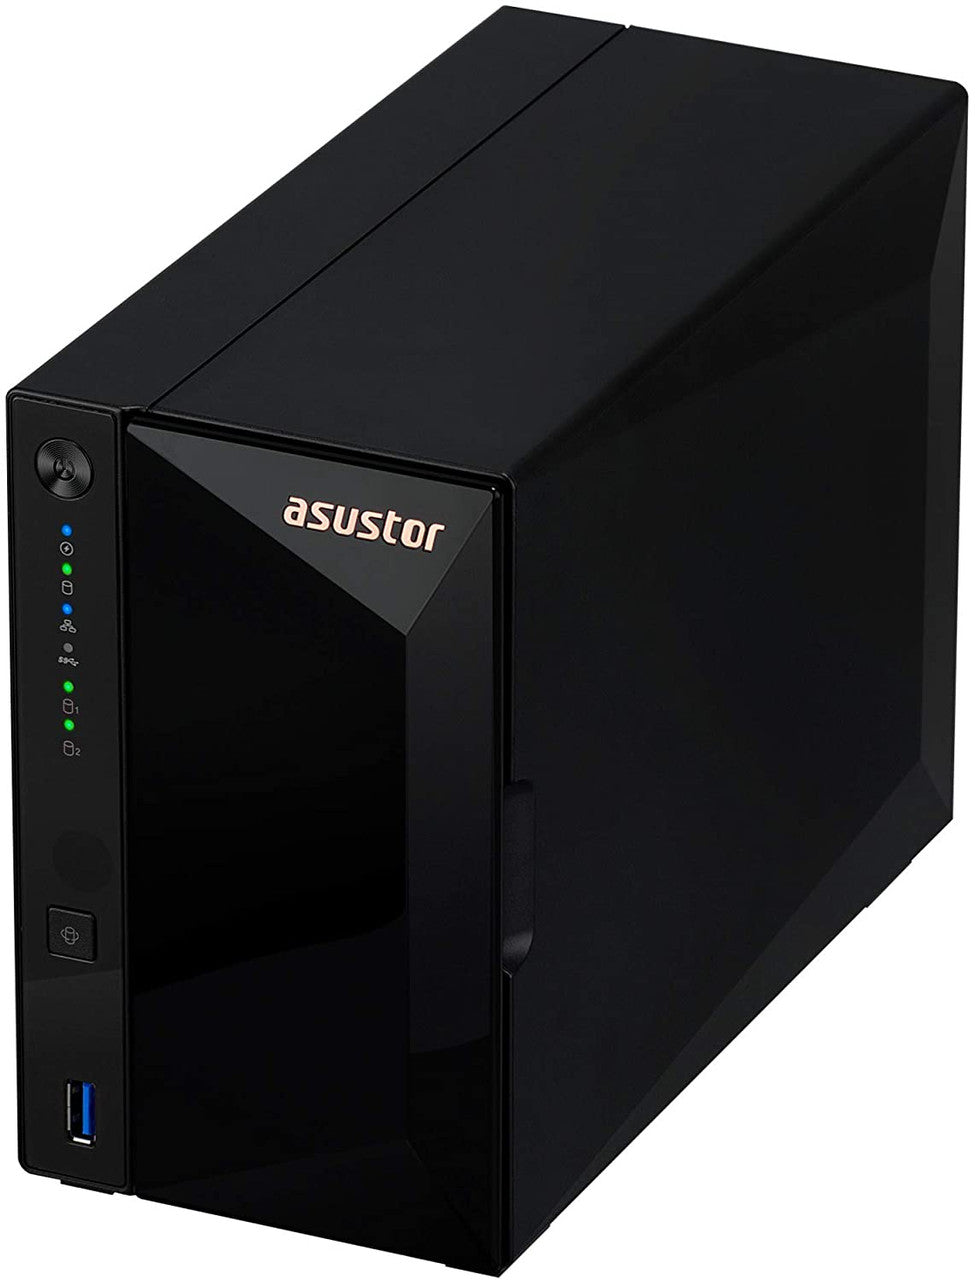 Asustor AS3302T 2-Bay Drivestor 2 PRO NAS with 2GB RAM and 4TB (2x2TB) Seagate Ironwolf NAS Drives Fully Assembled and Tested